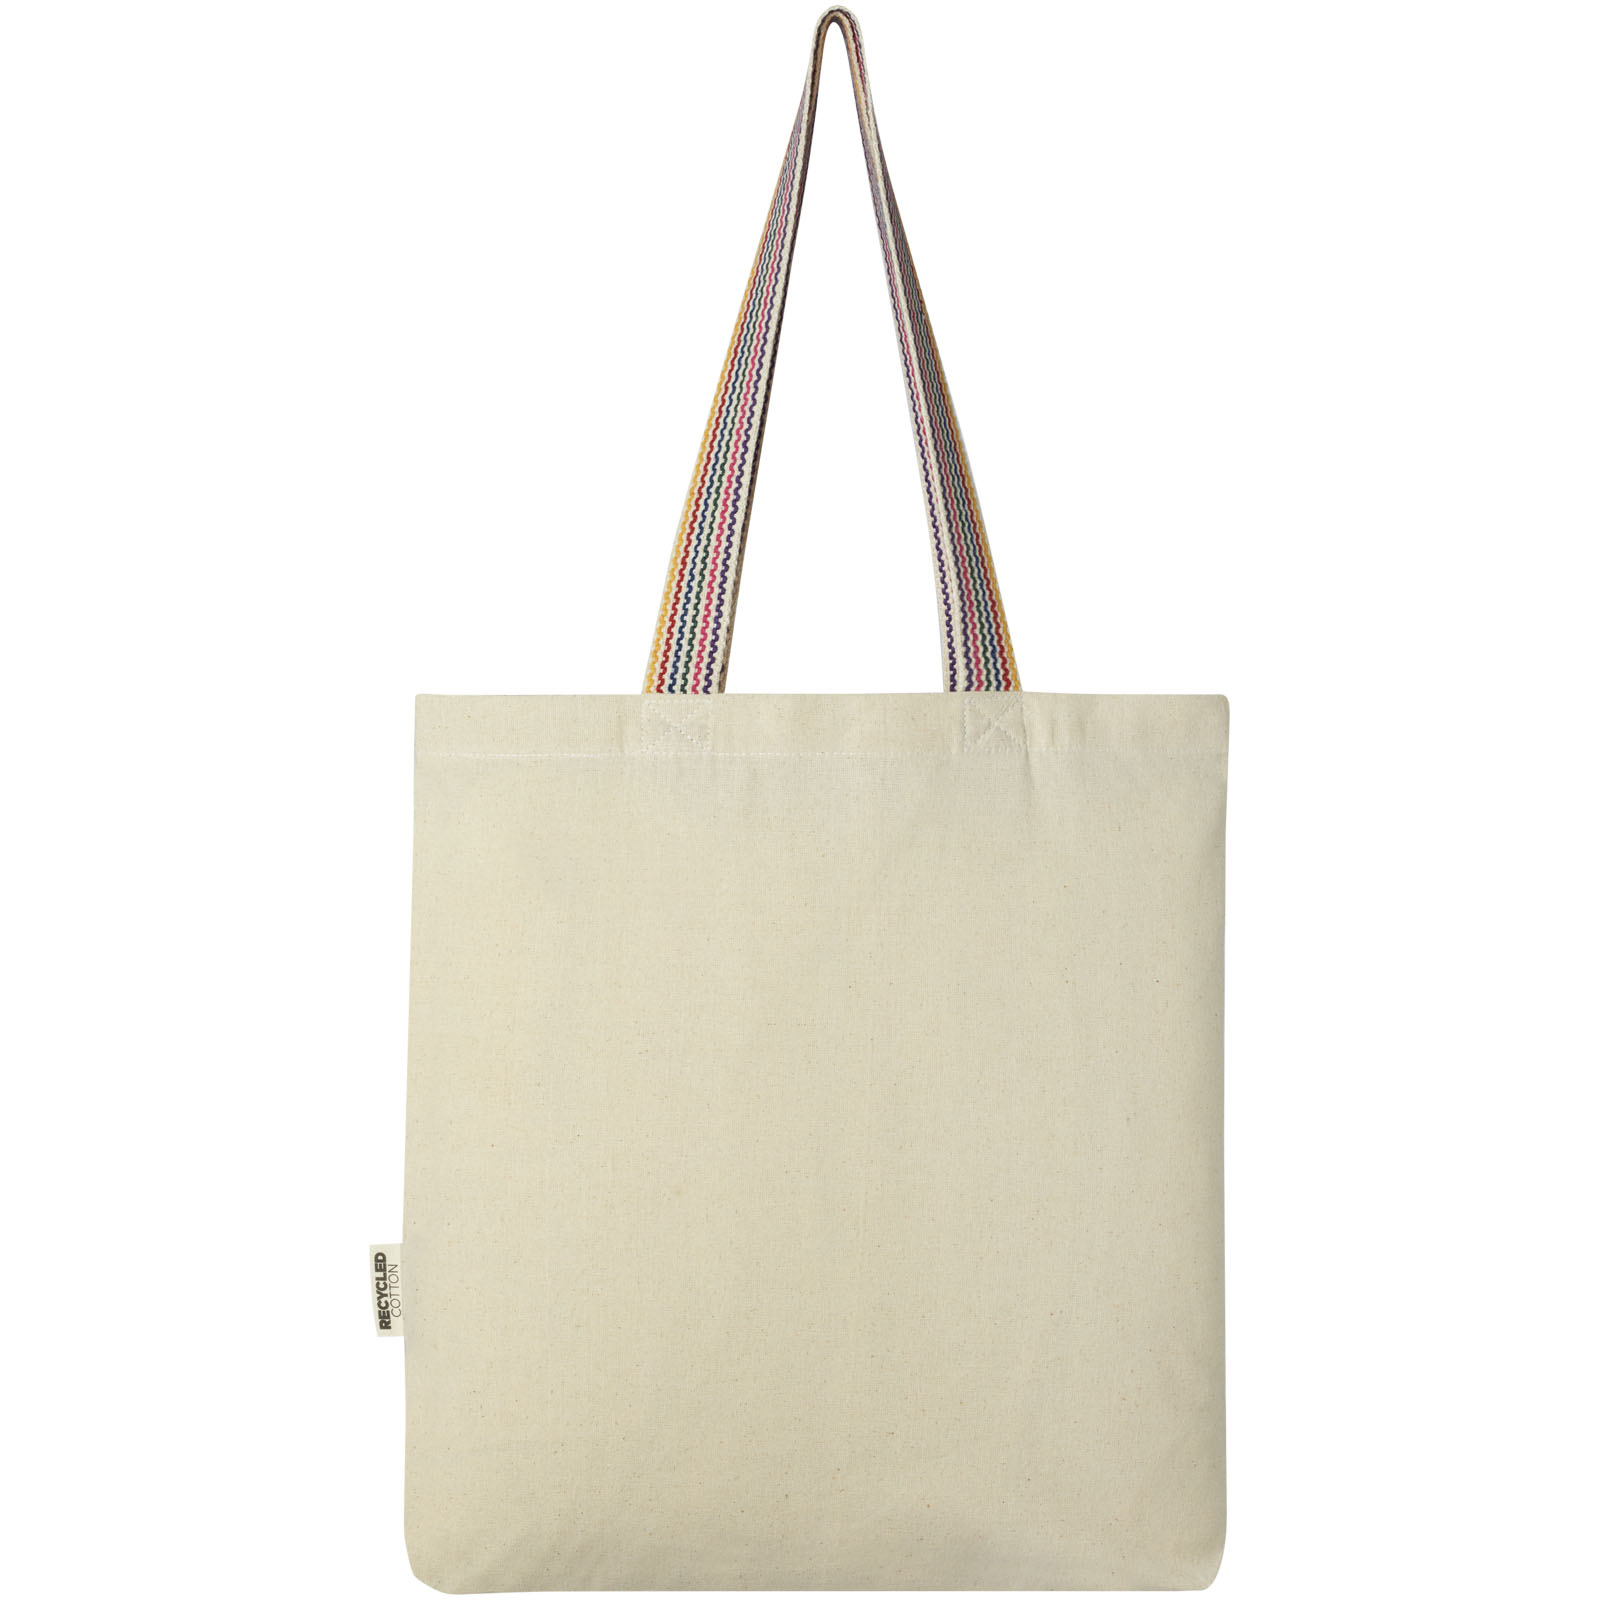 Advertising Shopping & Tote Bags - Rainbow 180 g/m² recycled cotton tote bag 5L - 2